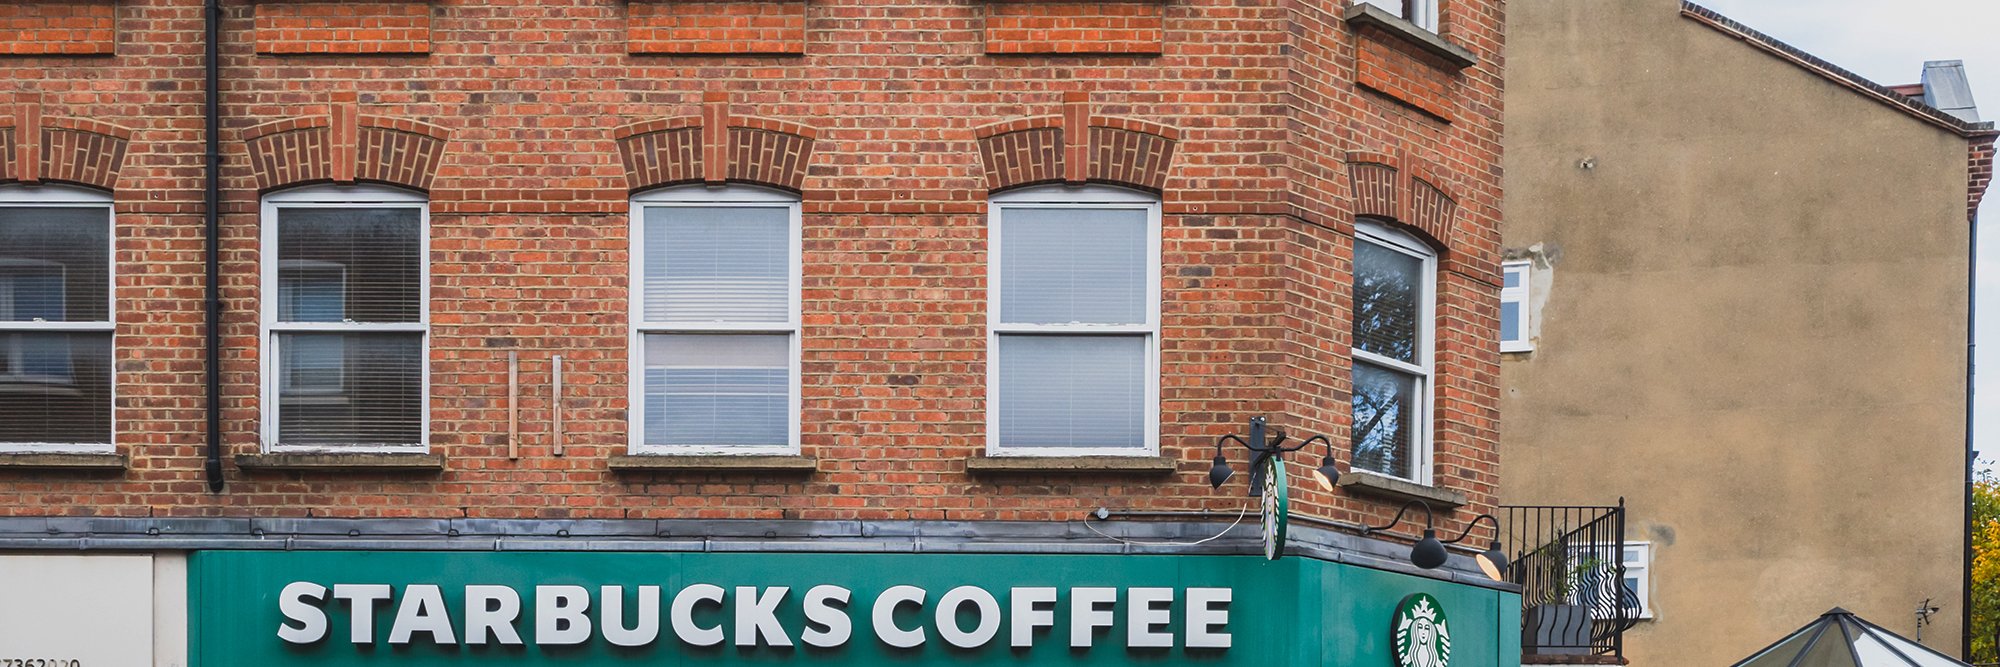 Exterior of Starbucks Coffee shop near Parsons Green in Fulham: Starbucks might sell its UK business.